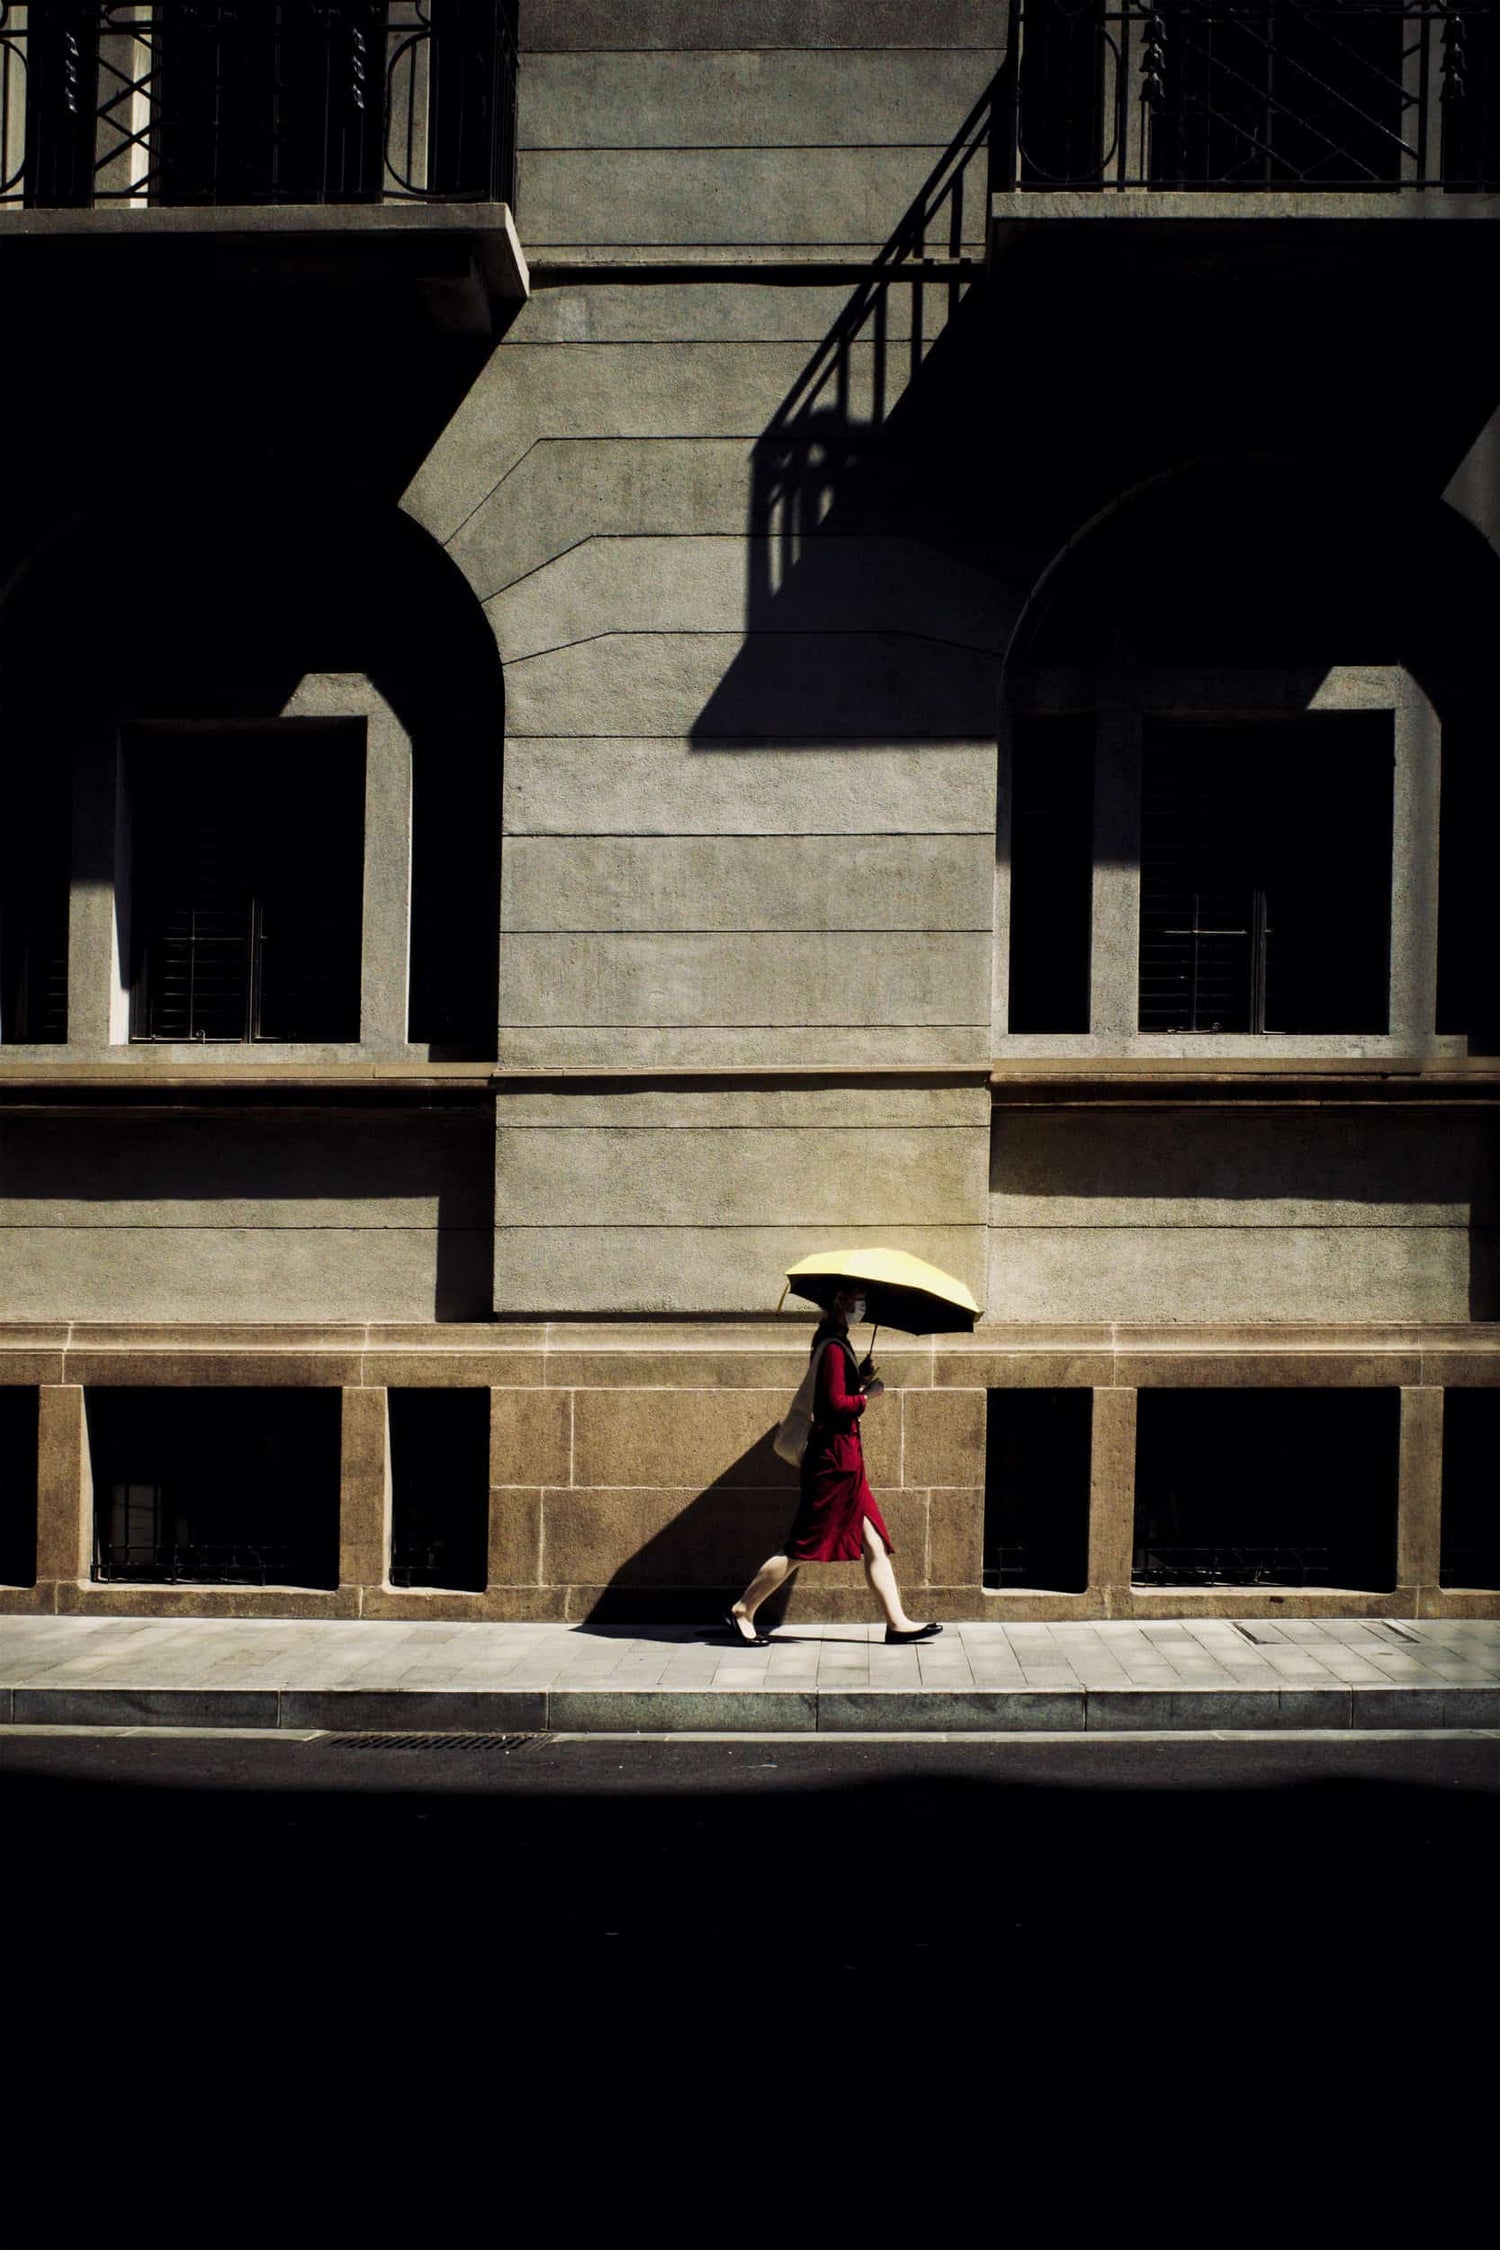 The artpiece 'Imagine' by Michael Cai which shows a woman in a red dress holding an umbrella while walking on the sidewalk.